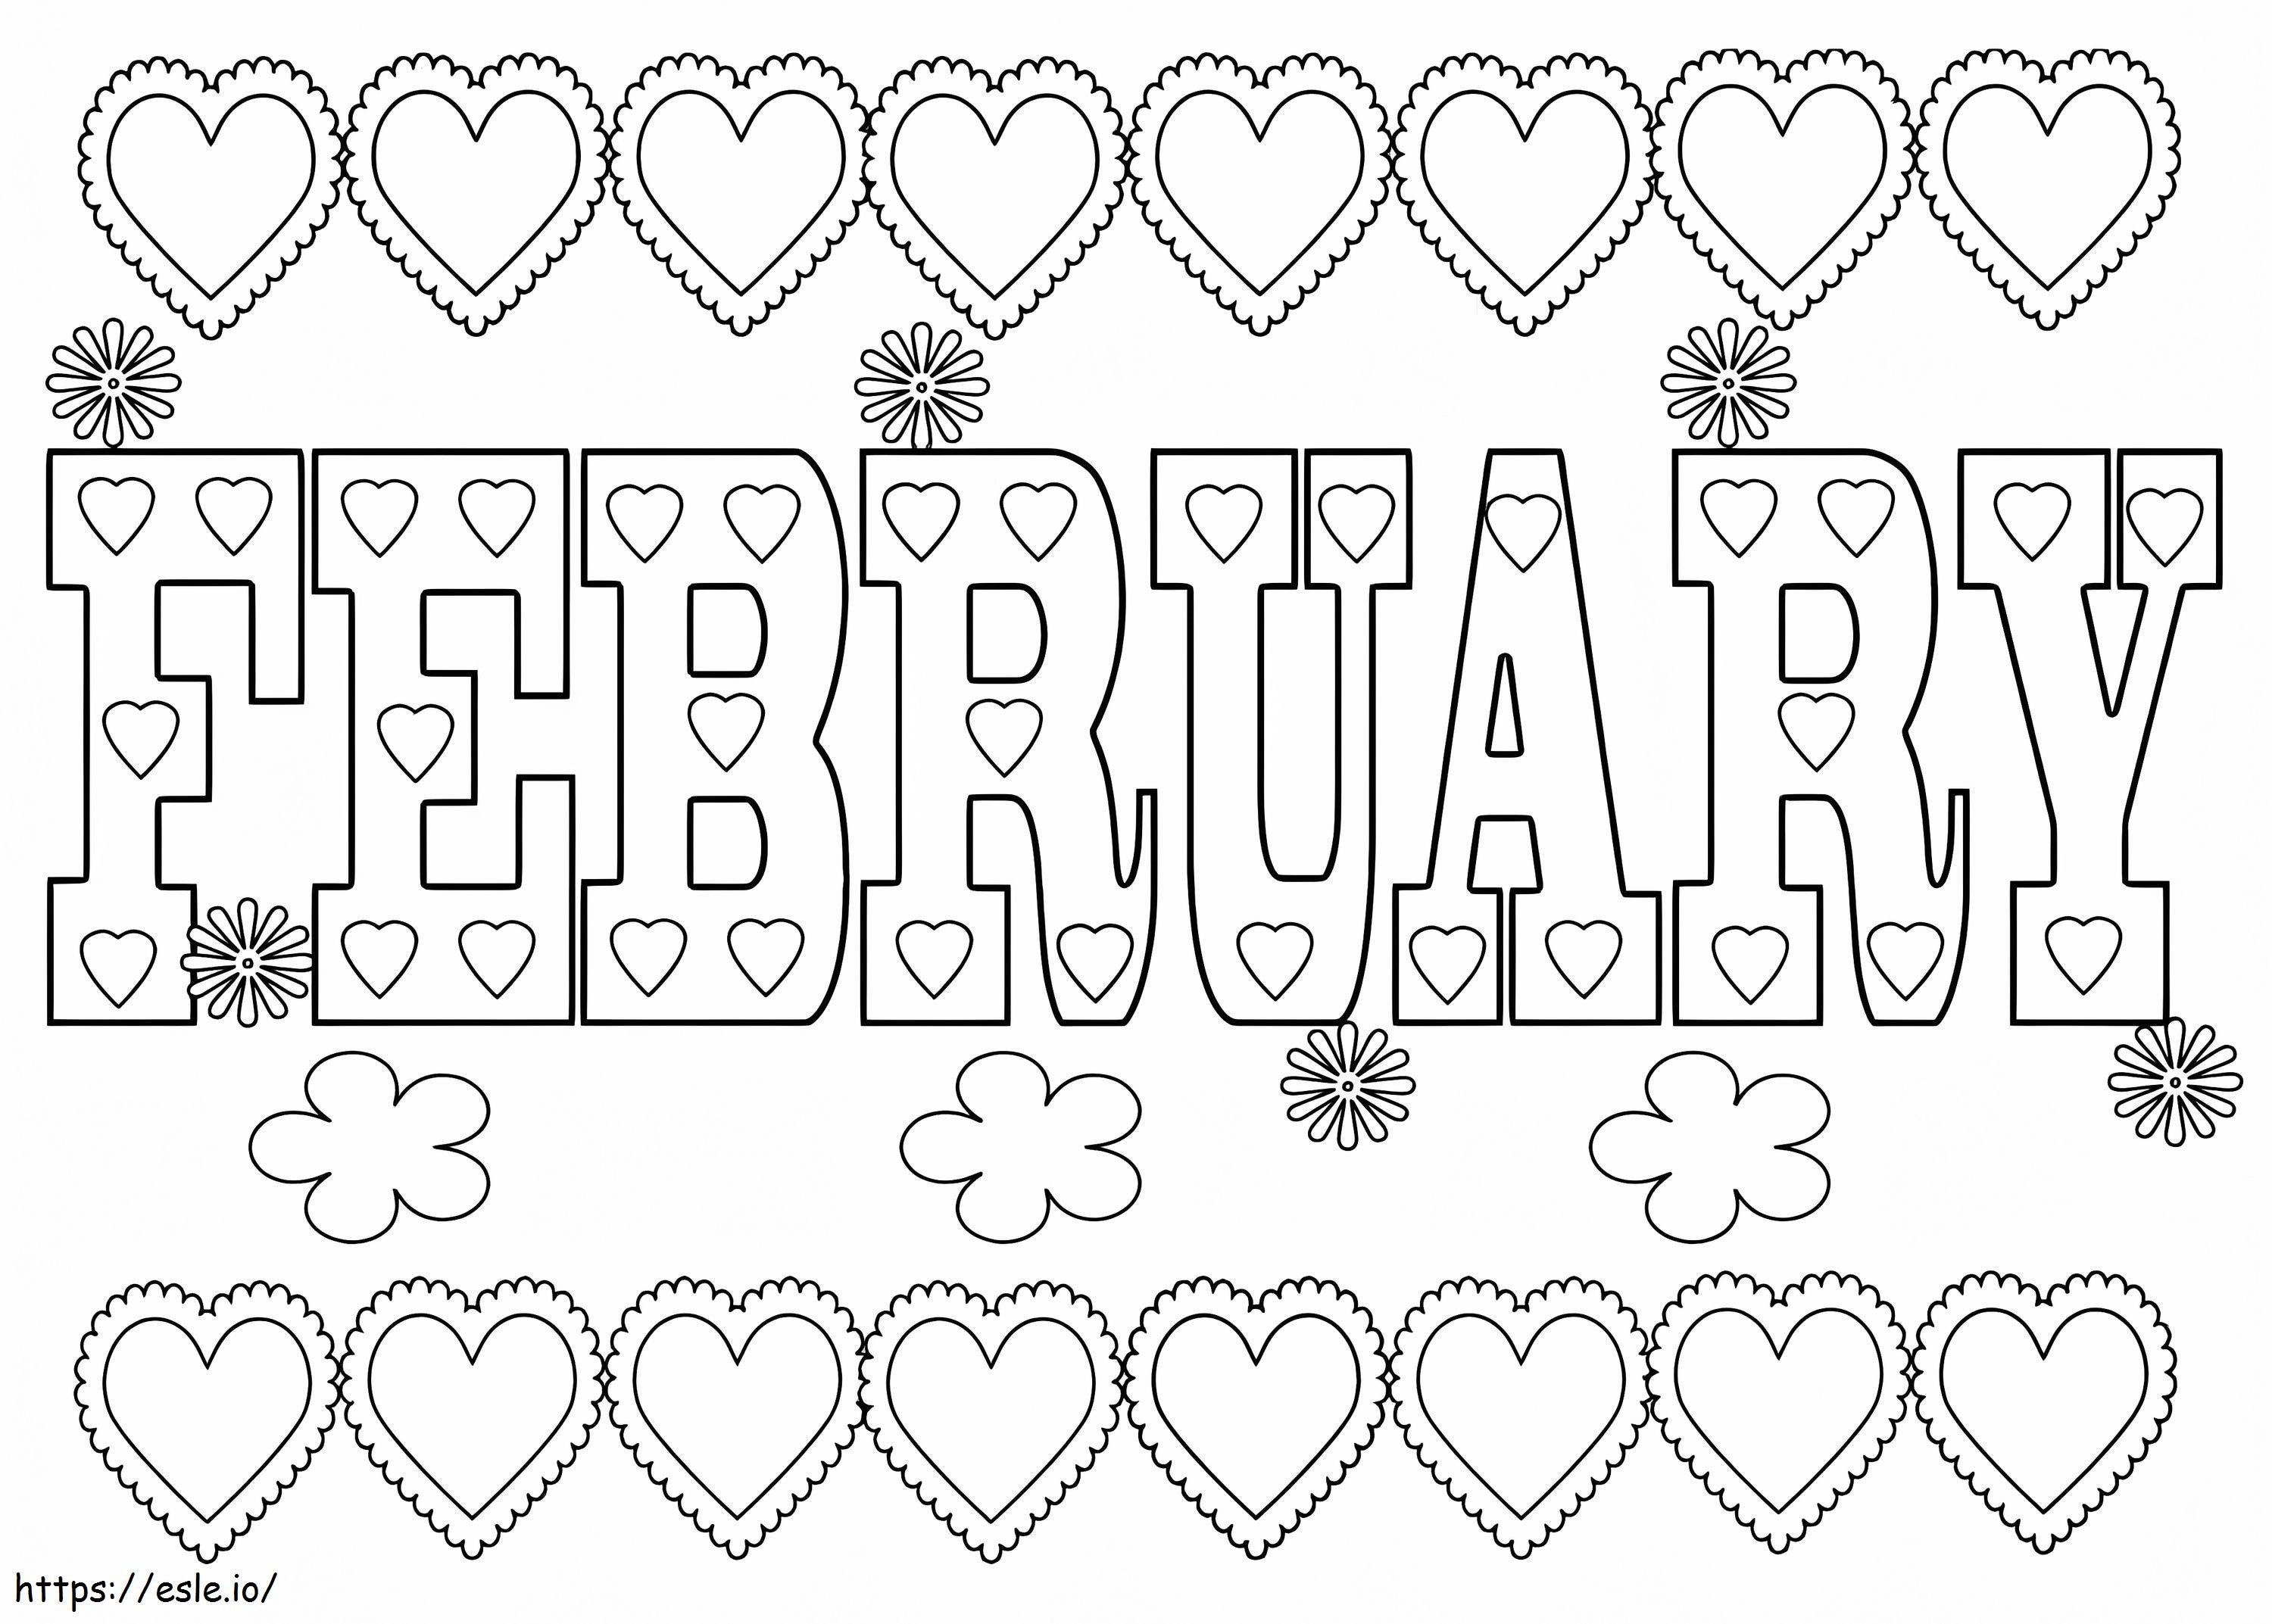 February Coloring Page coloring page